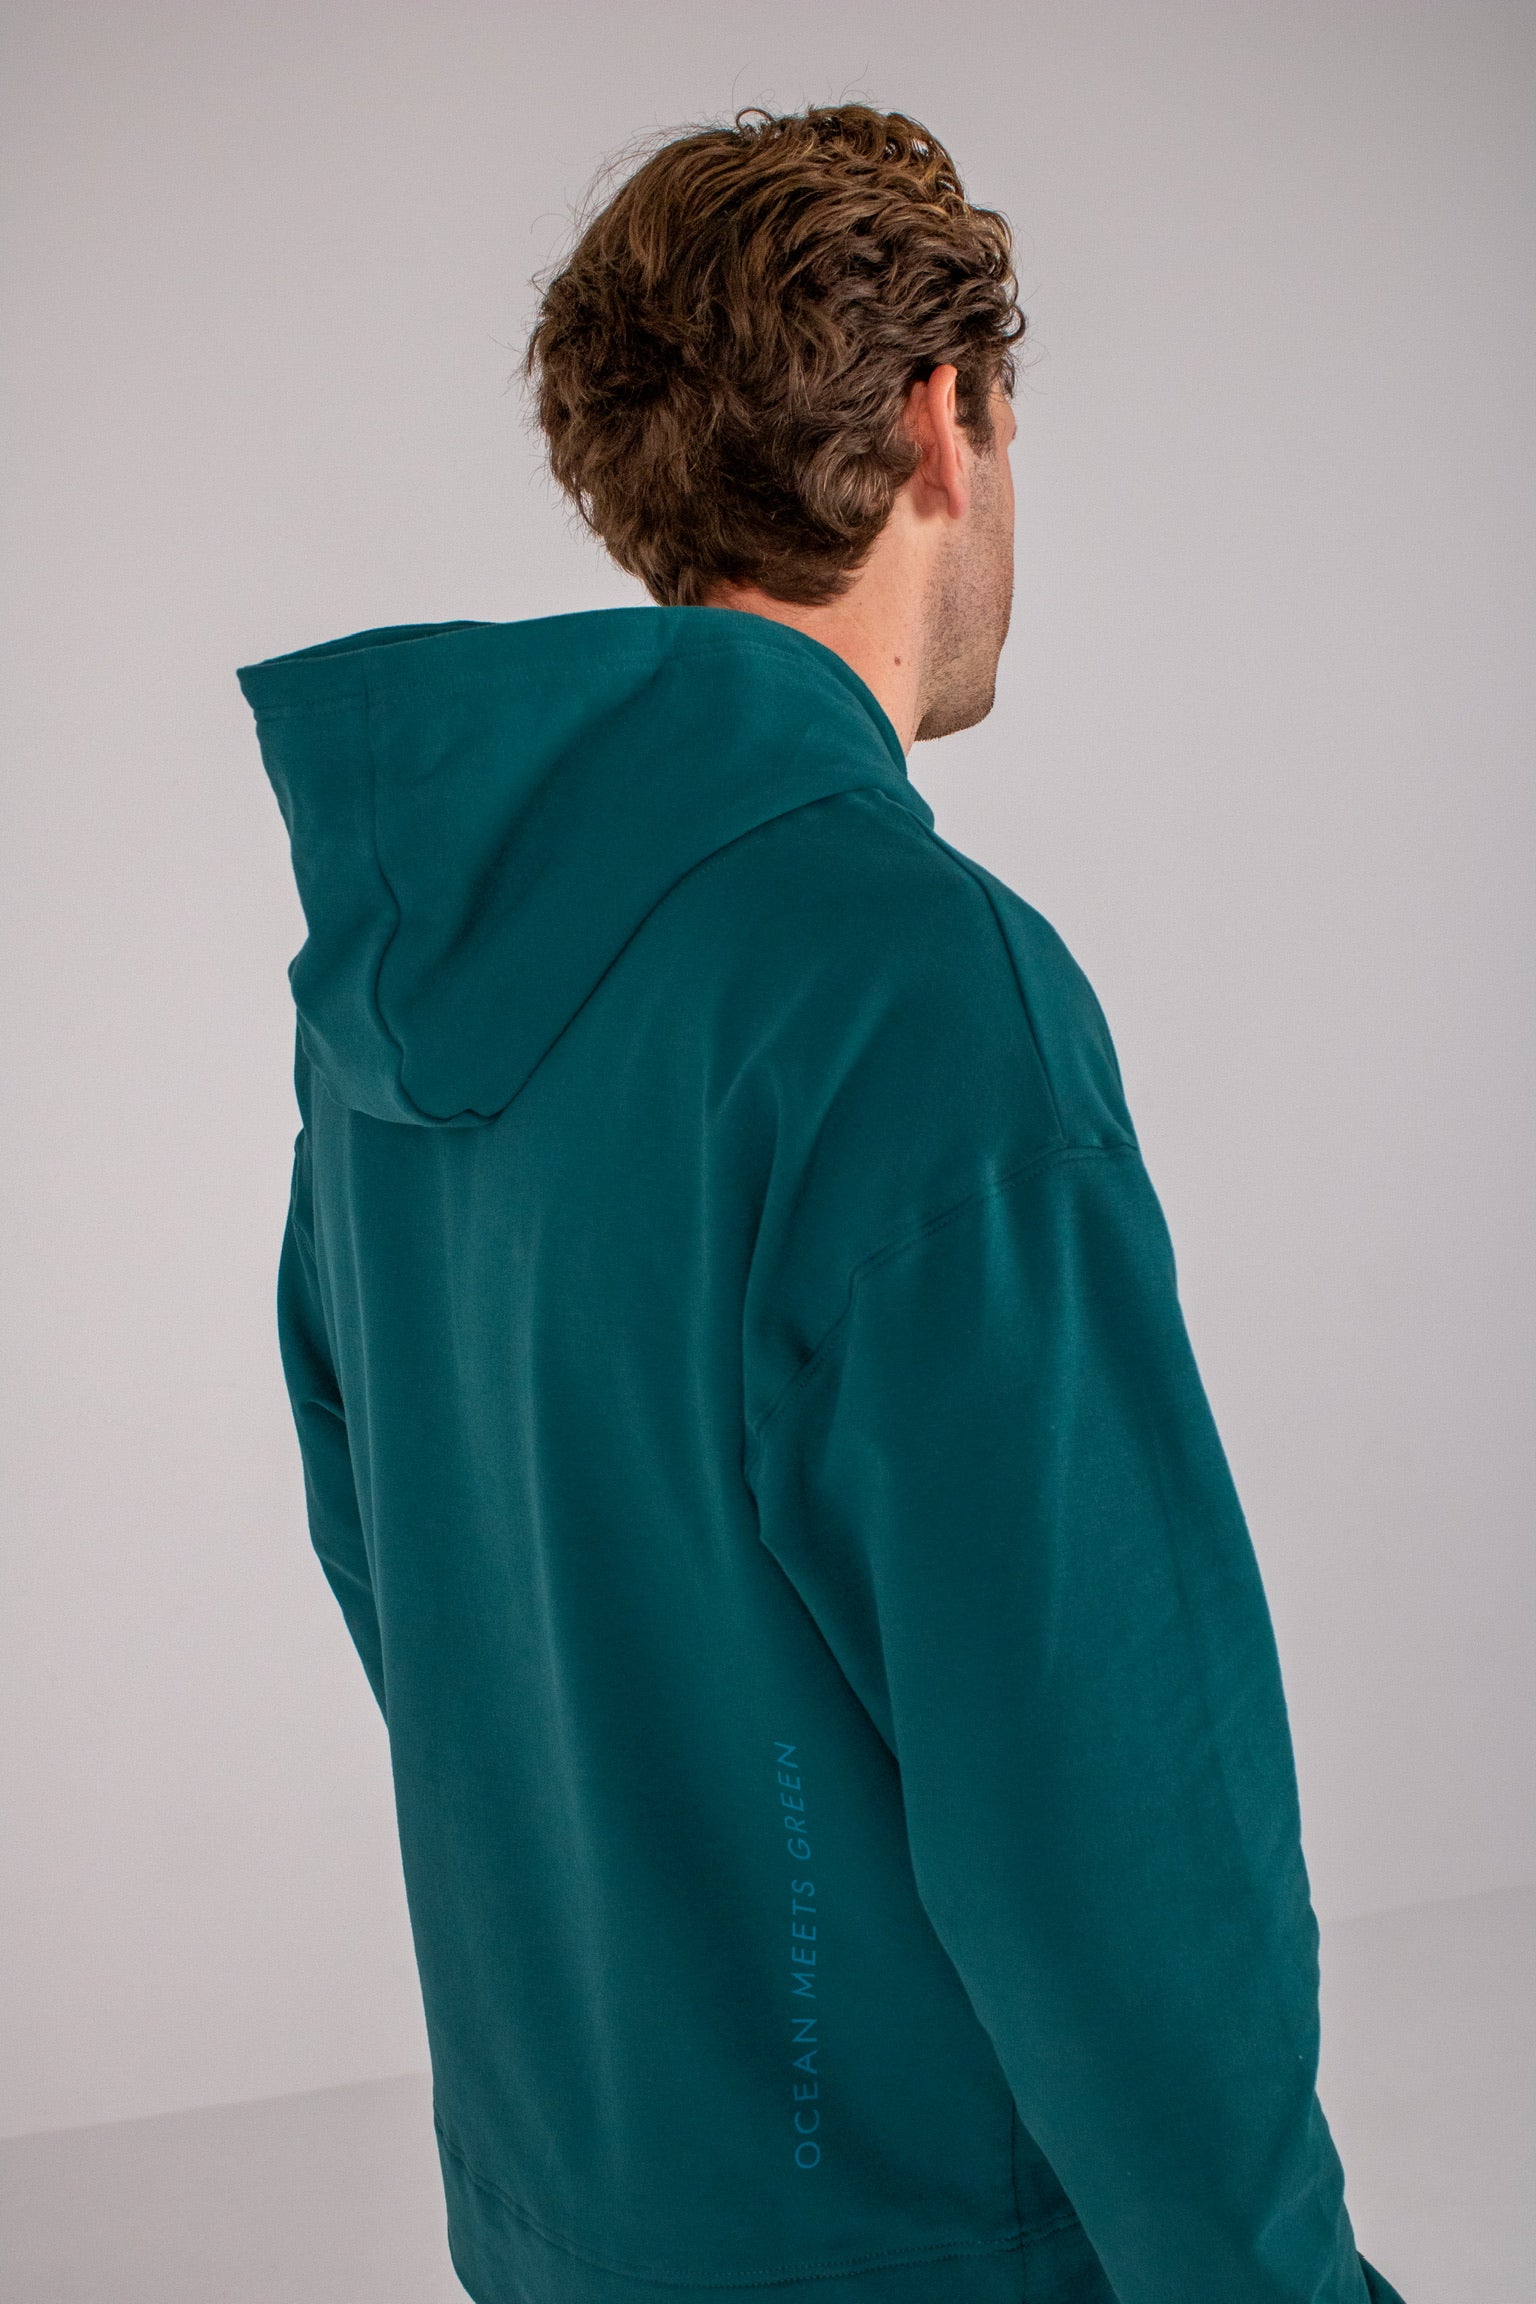 Full body image of Ocean Meets Green men's golf hoodie Wave in pine, showing the back